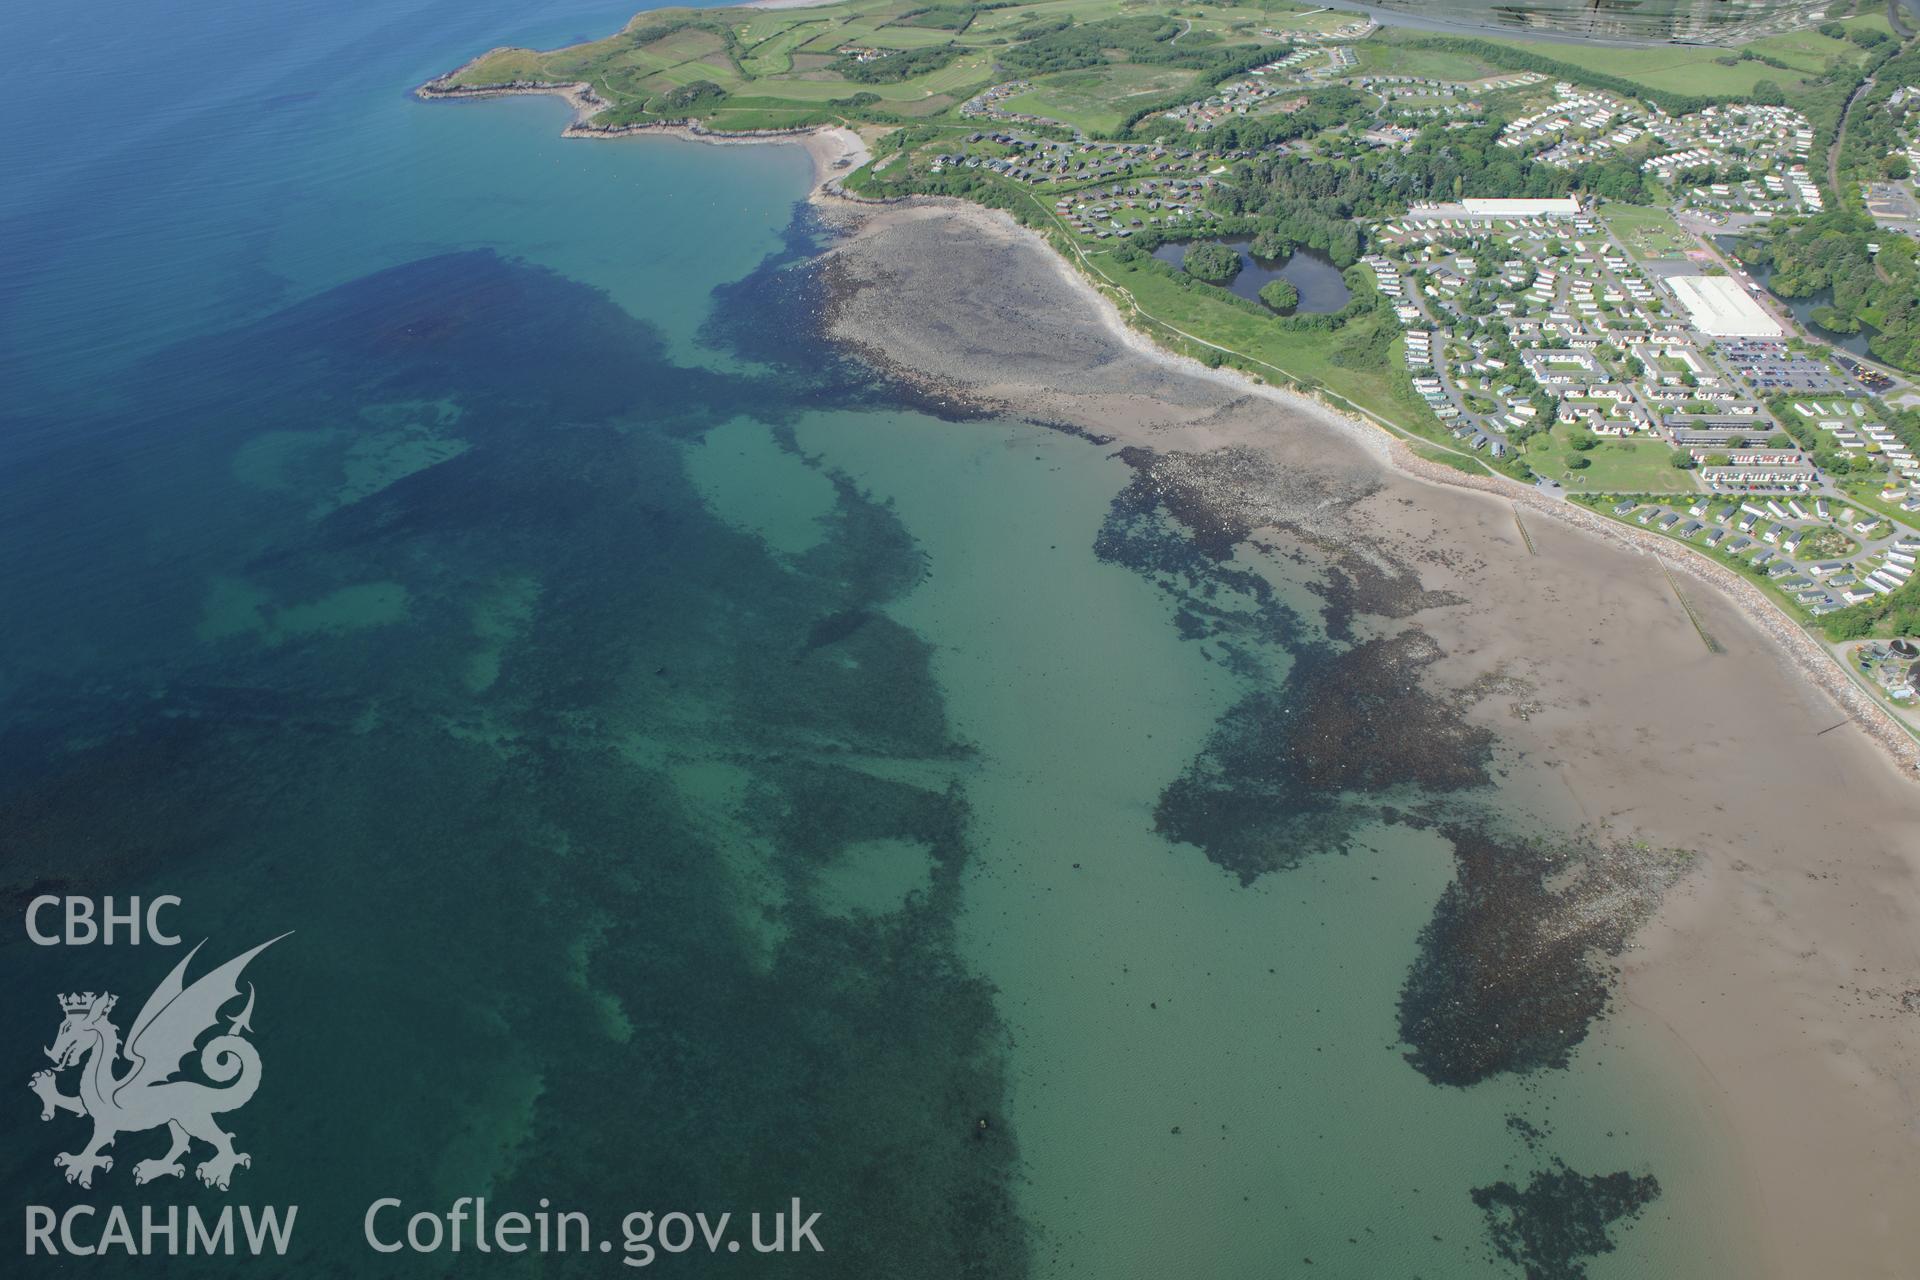 Hafan y Mor Holiday Park and Cerrig y Barcdy fish trap, Pwllheli. Oblique aerial photograph taken during the Royal Commission's programme of archaeological aerial reconnaissance by Toby Driver on 23rd June 2015.